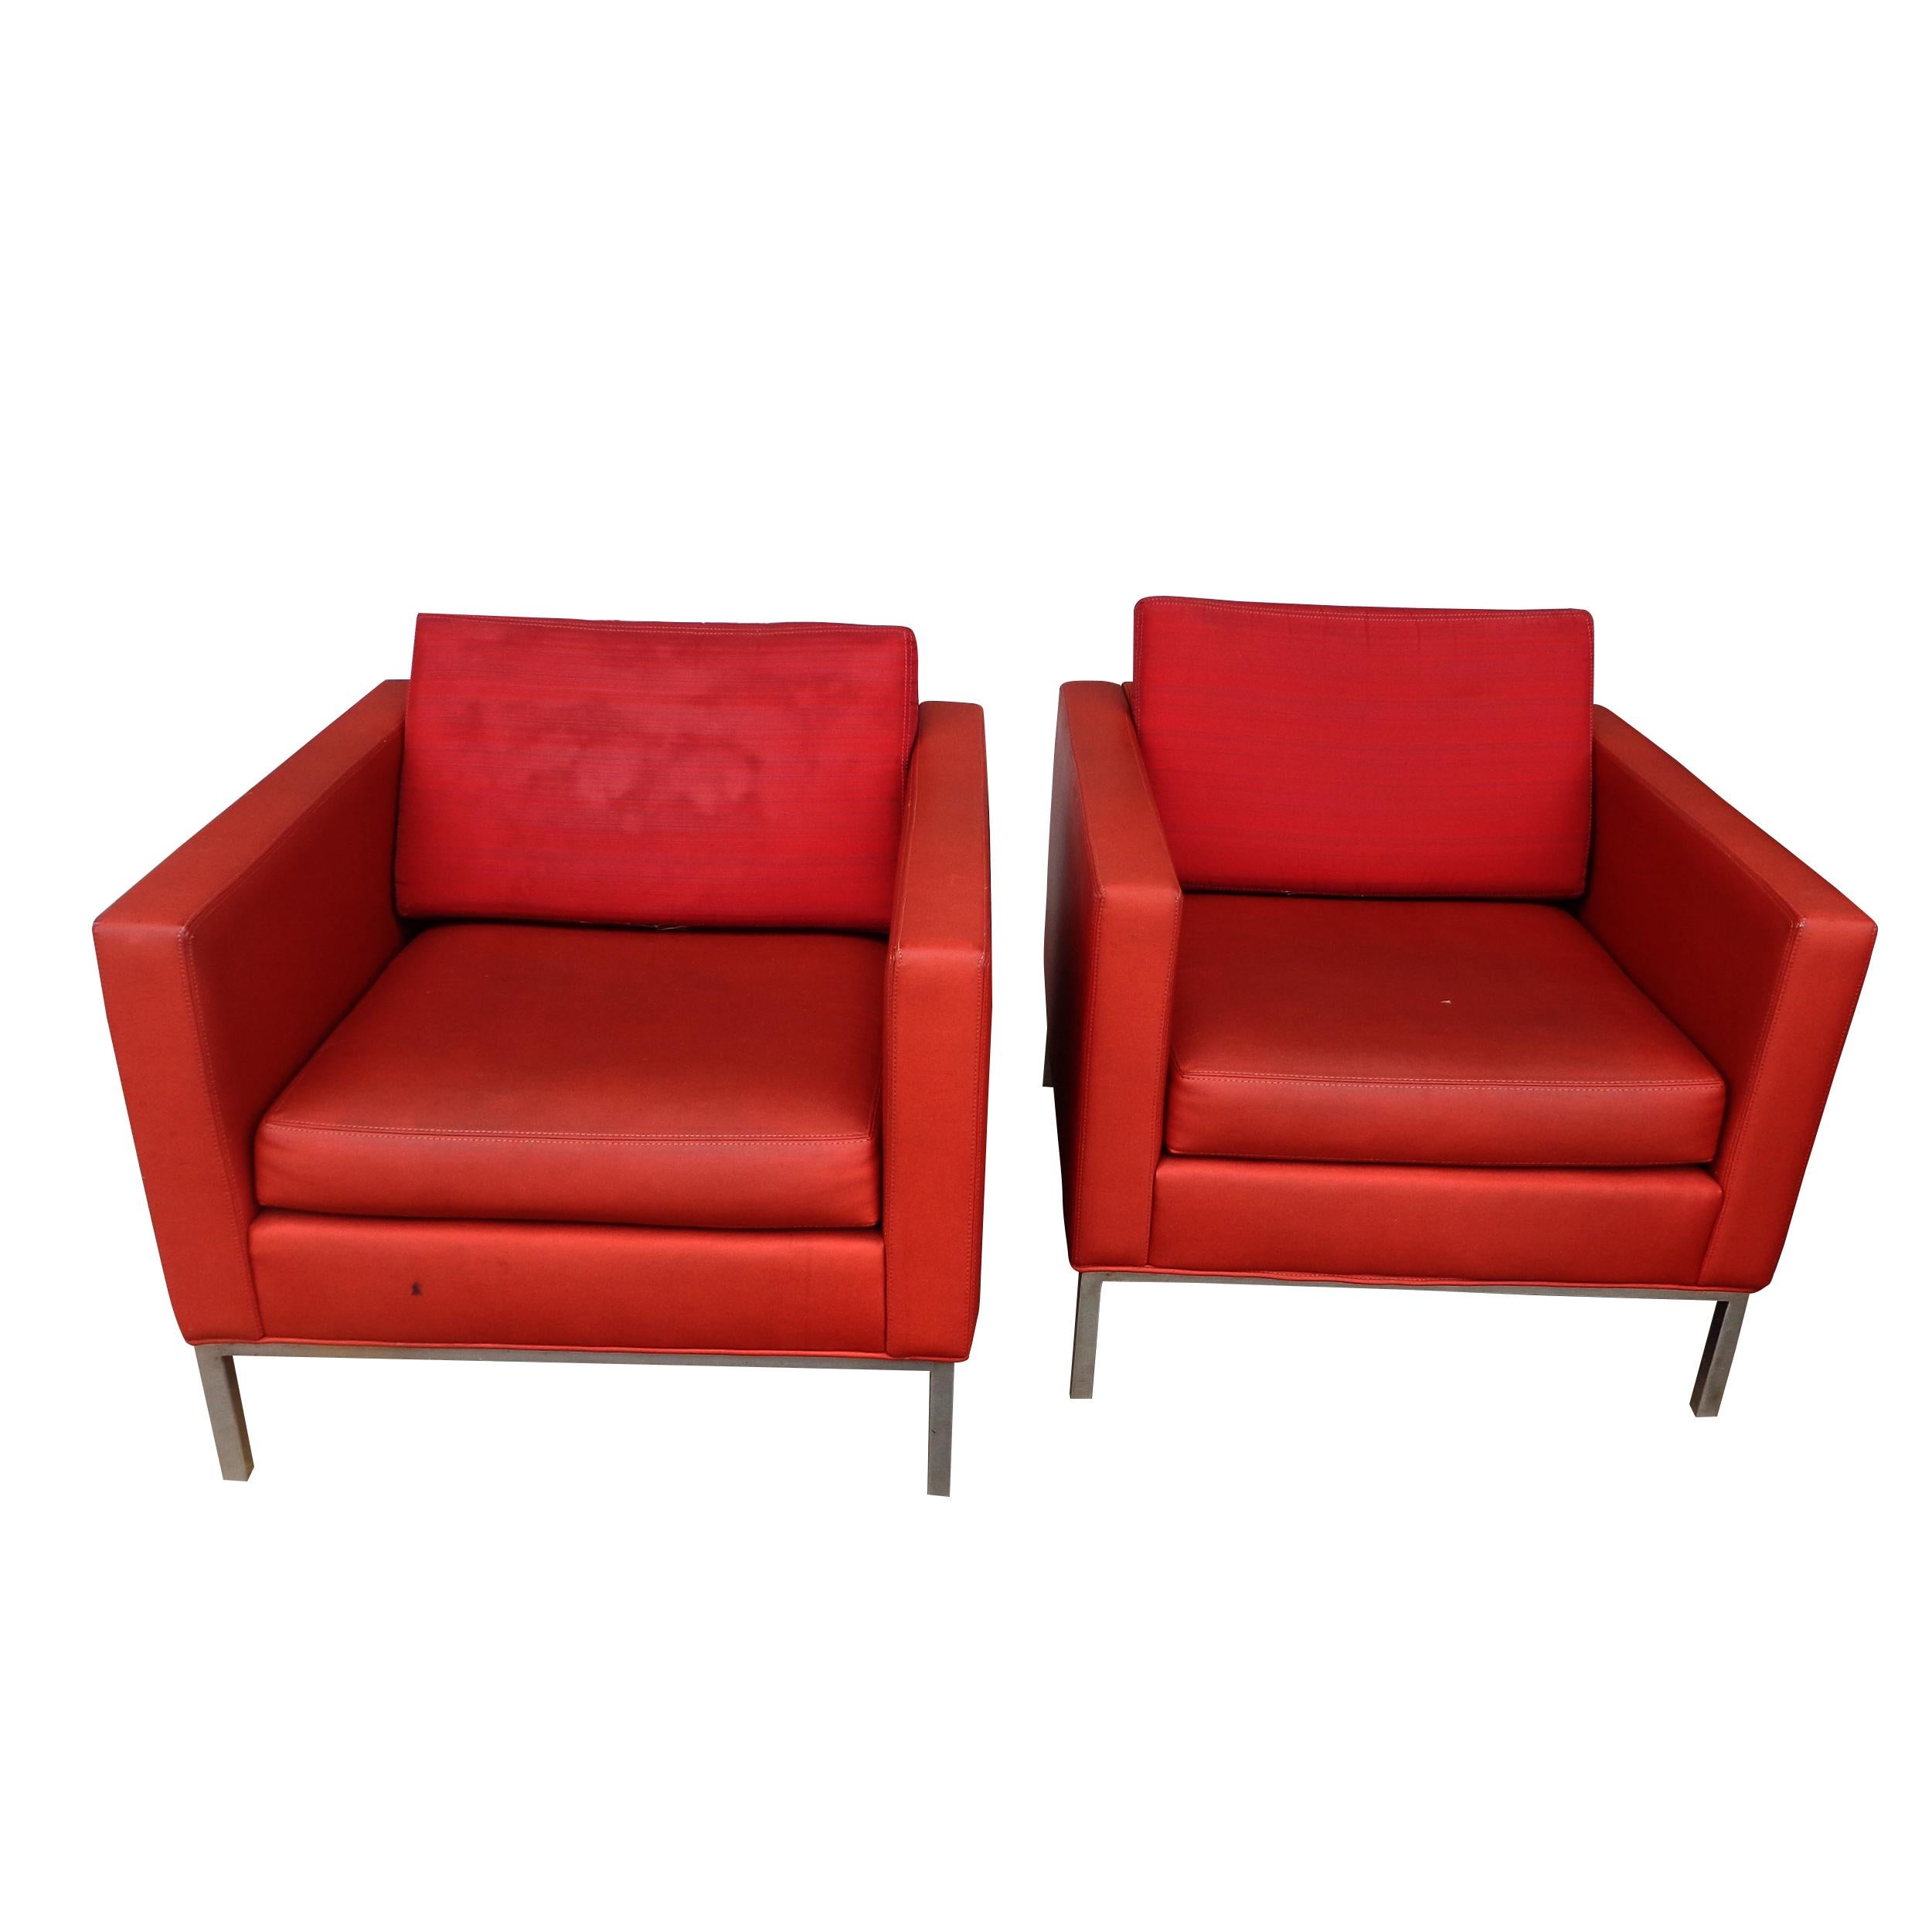 North American Pair of Jack Cartwright Logan Lounge Chairs For Sale